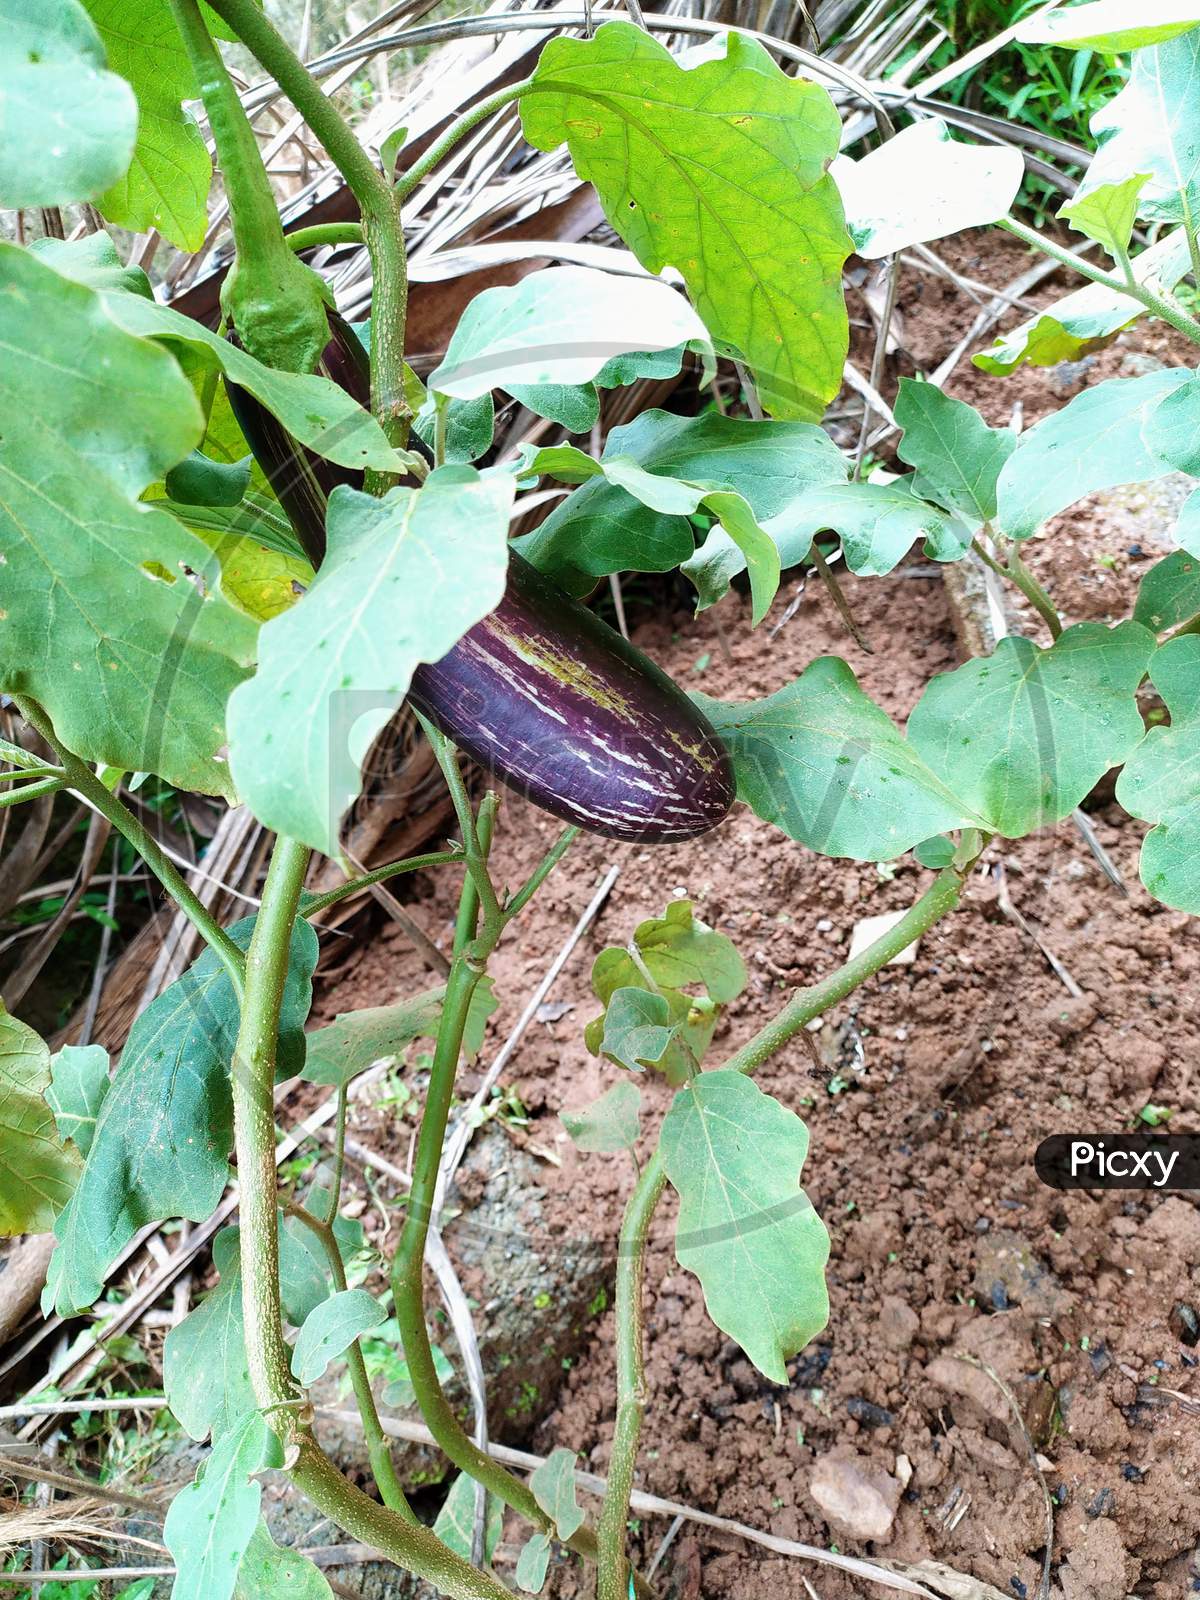 Brinjal(Eggplant) Is Hanging On Its Root,Homegrown Egg Plant